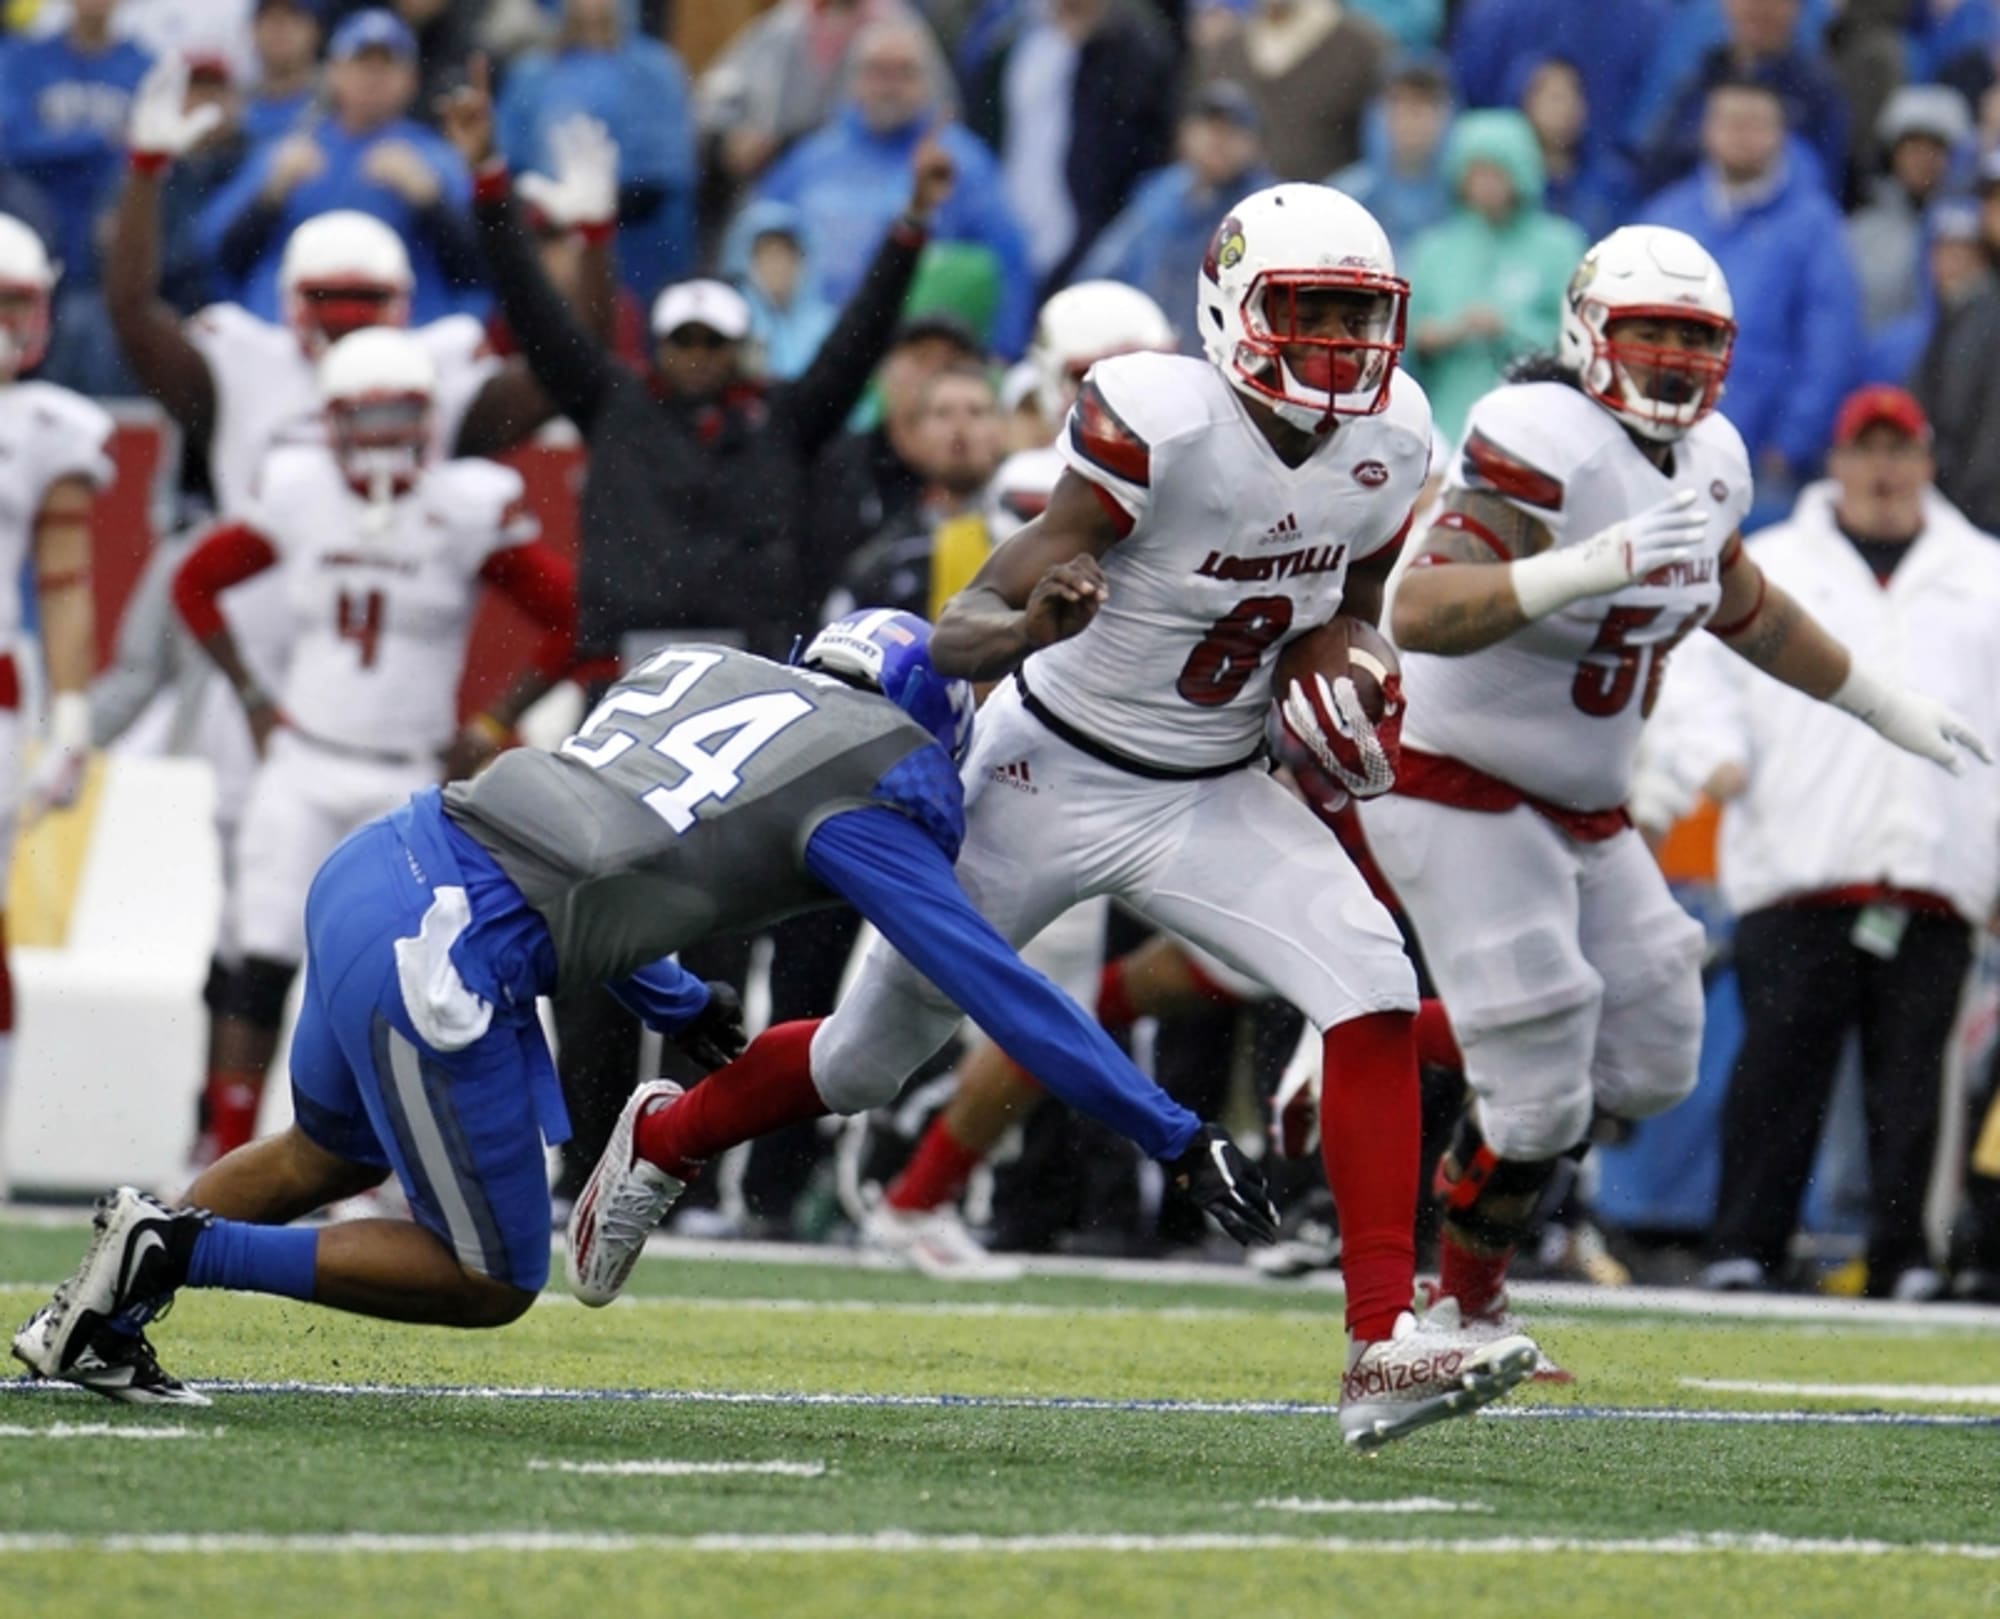 Louisville Football: Inside the numbers of the Kentucky Wildcats